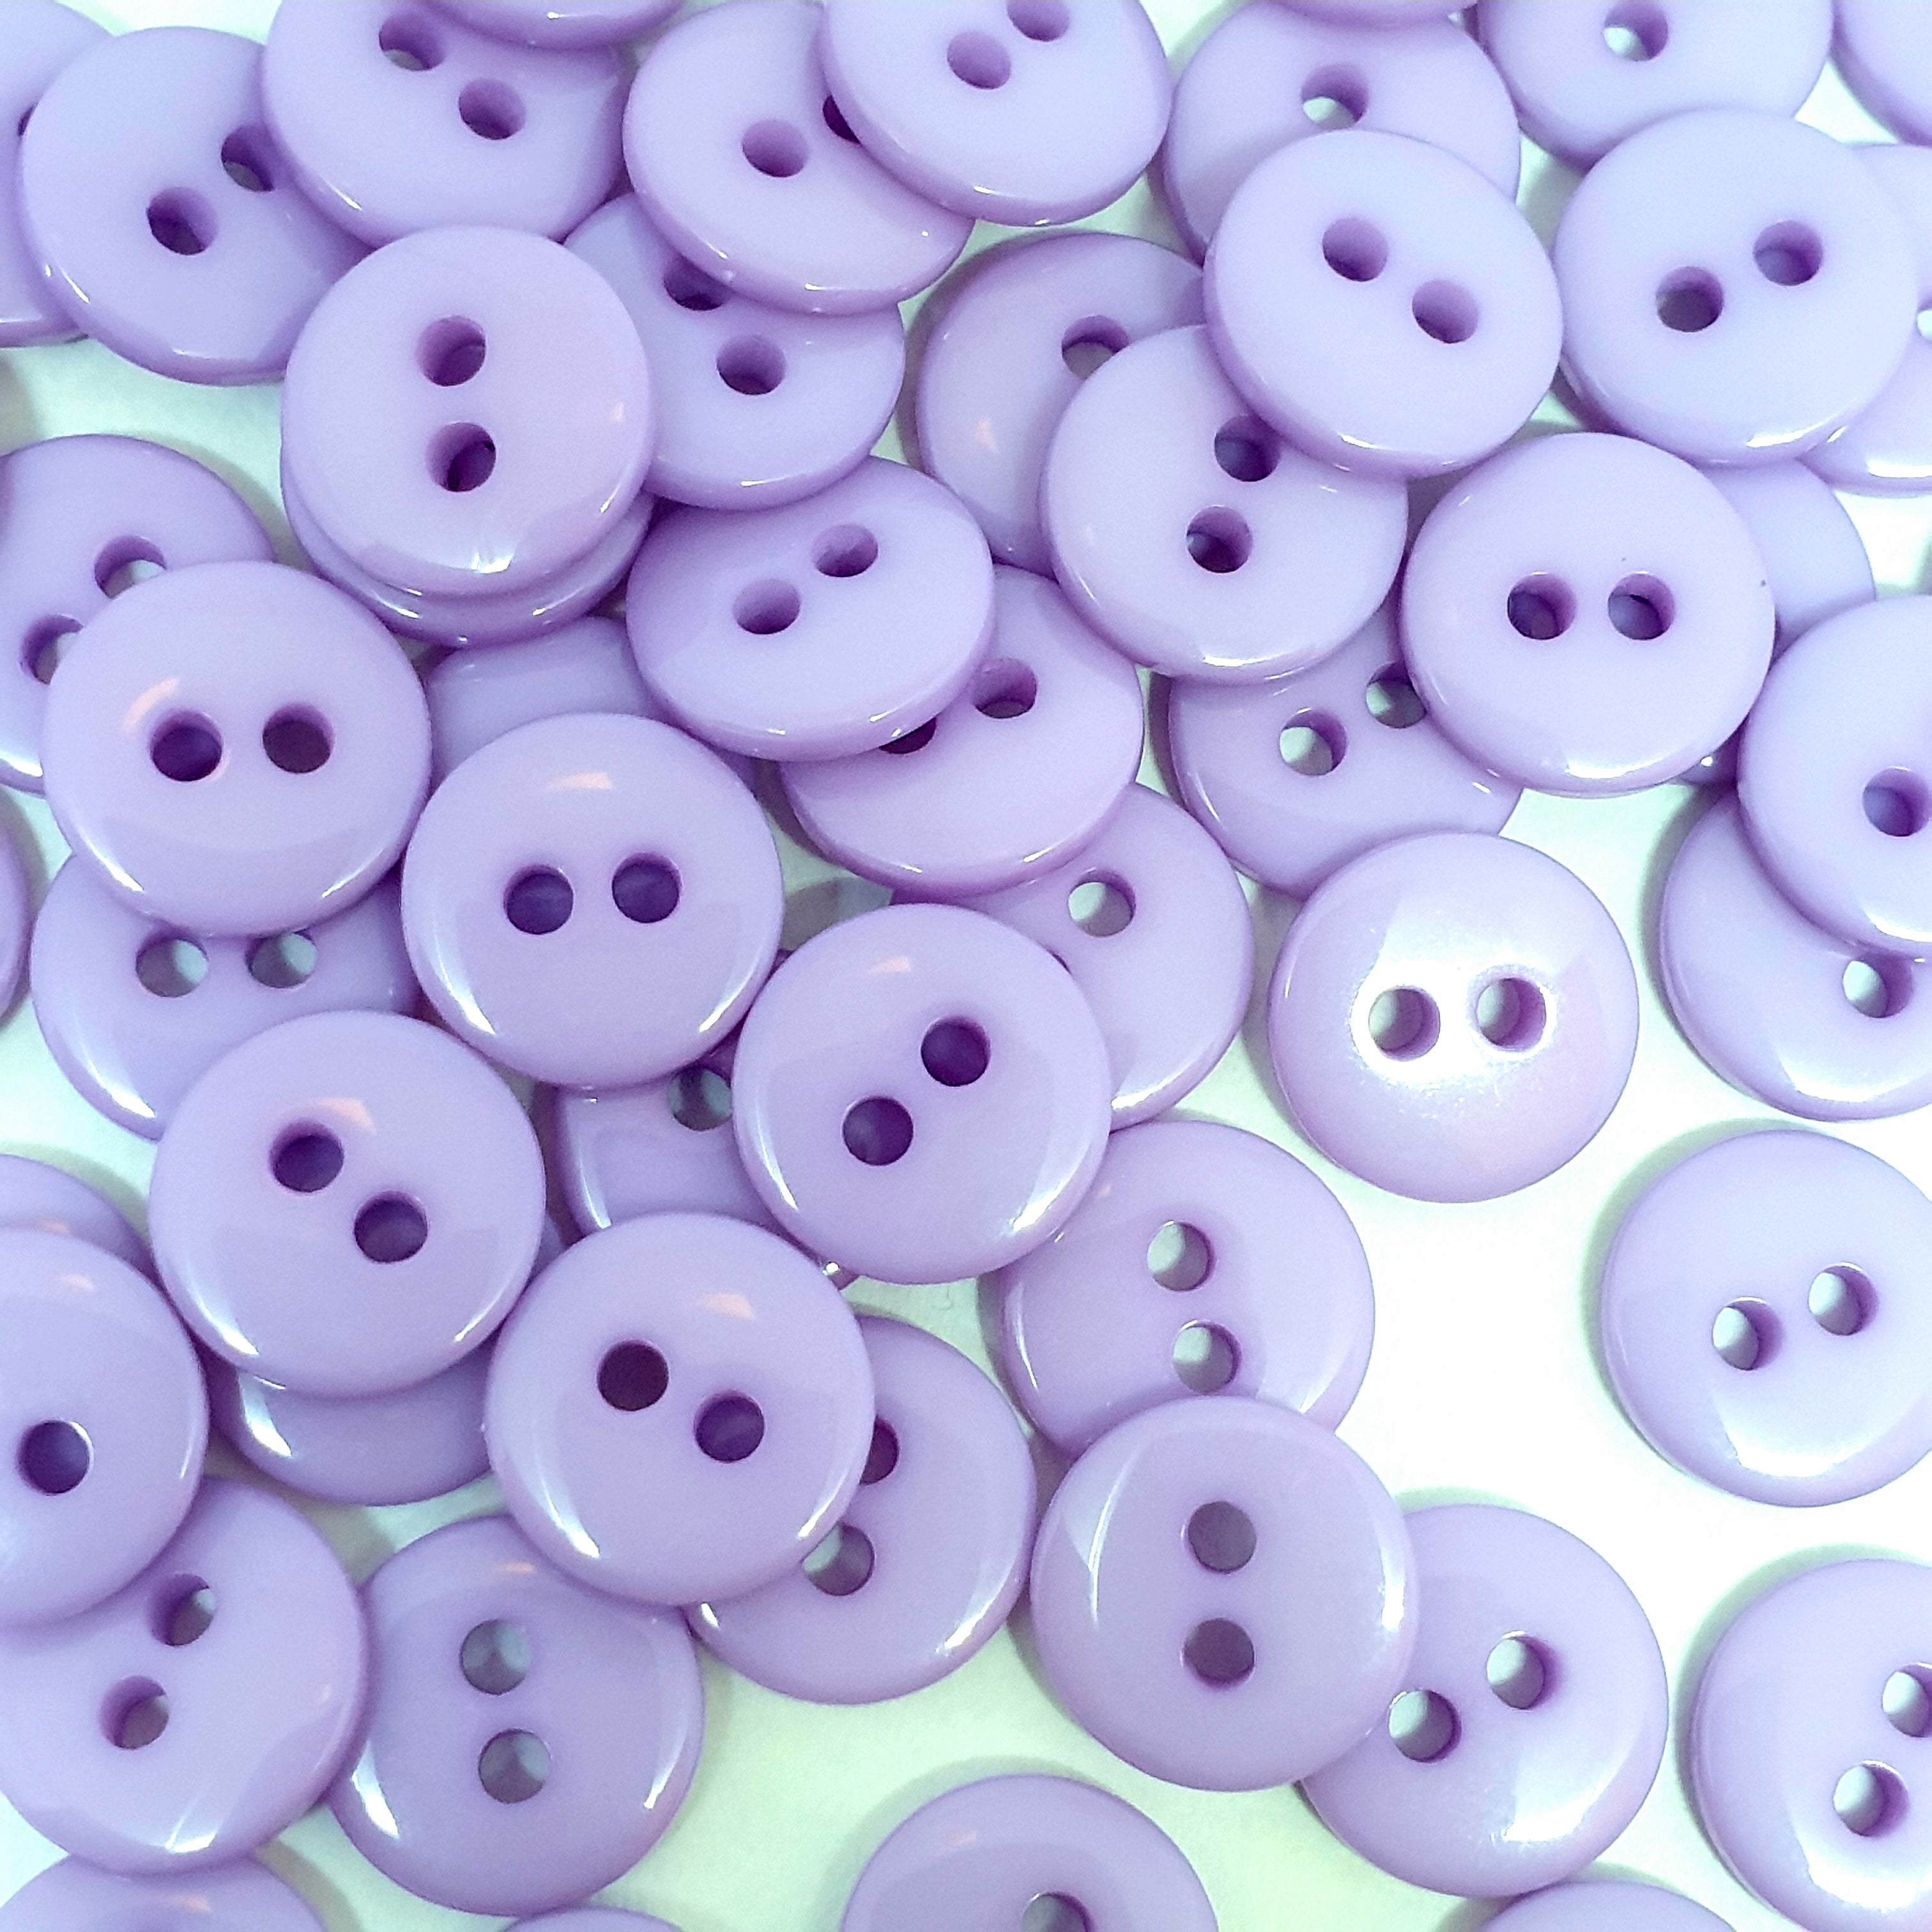 MajorCrafts 120pcs 10mm Light Purple 2 Holes Small Round Resin Sewing Buttons B13